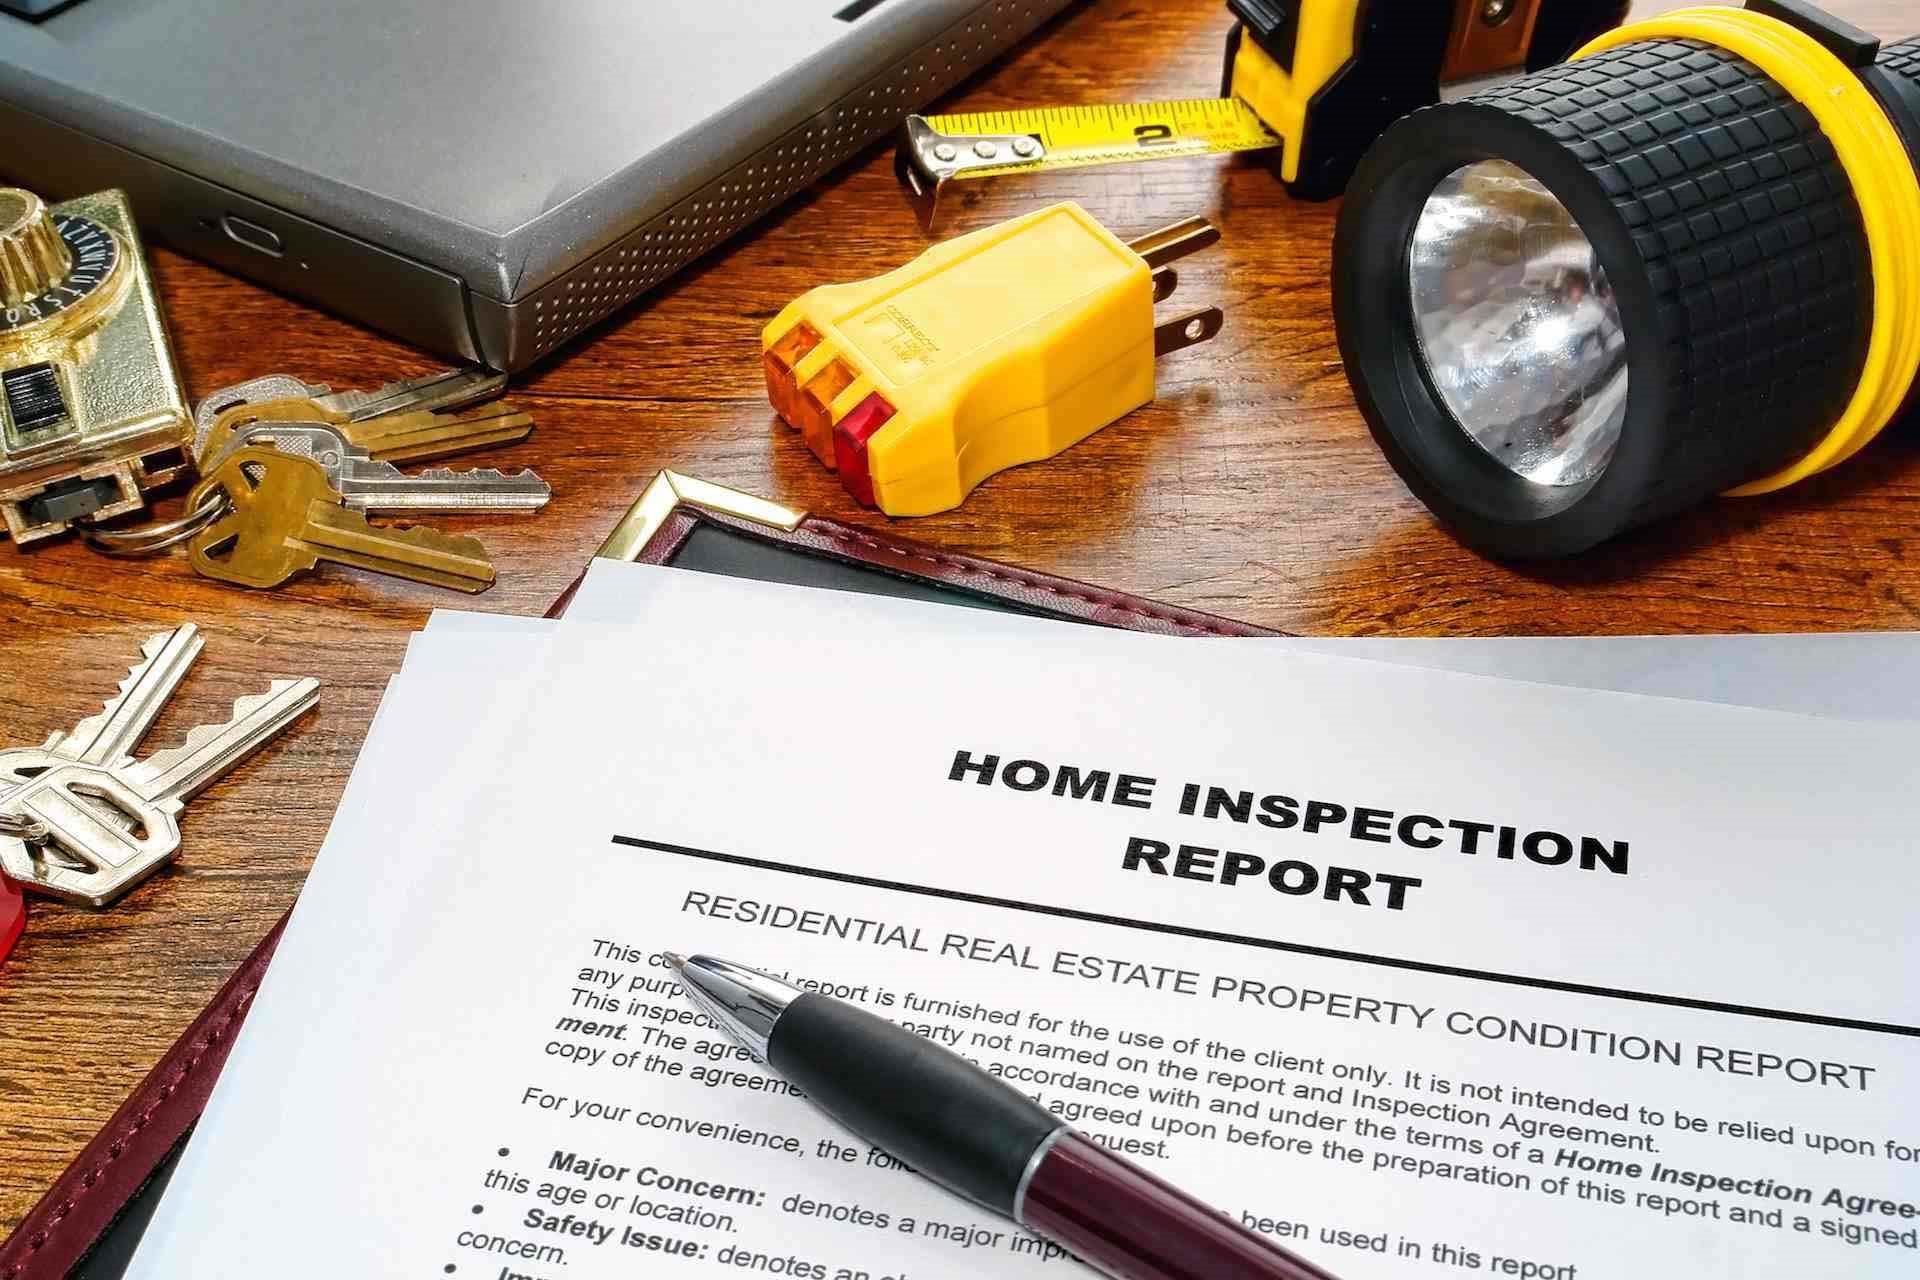 Finding a Home Inspector in NW Florida